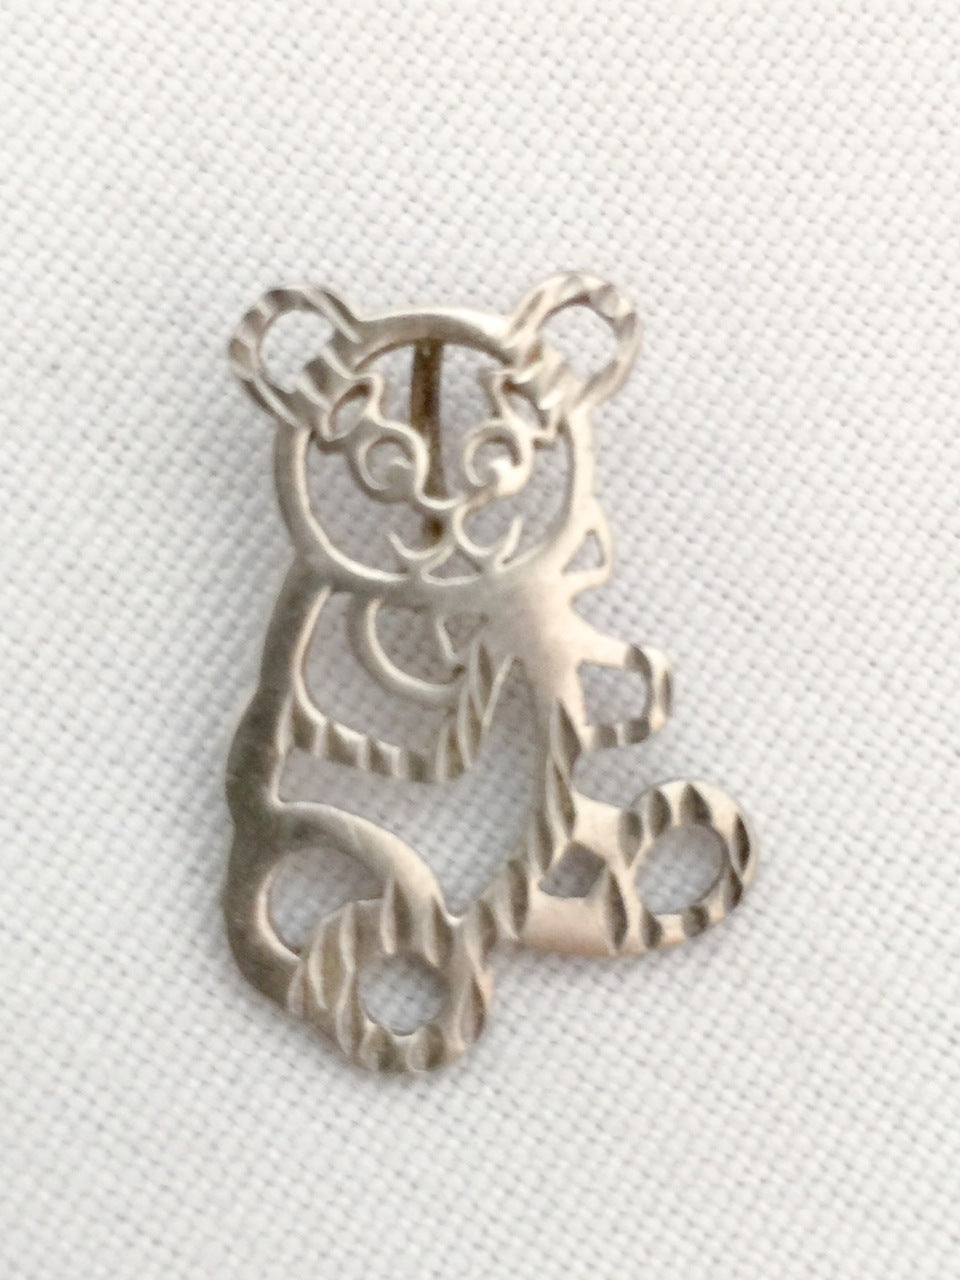 Bear Charm or Small Pendant Sterling Silver Vintage